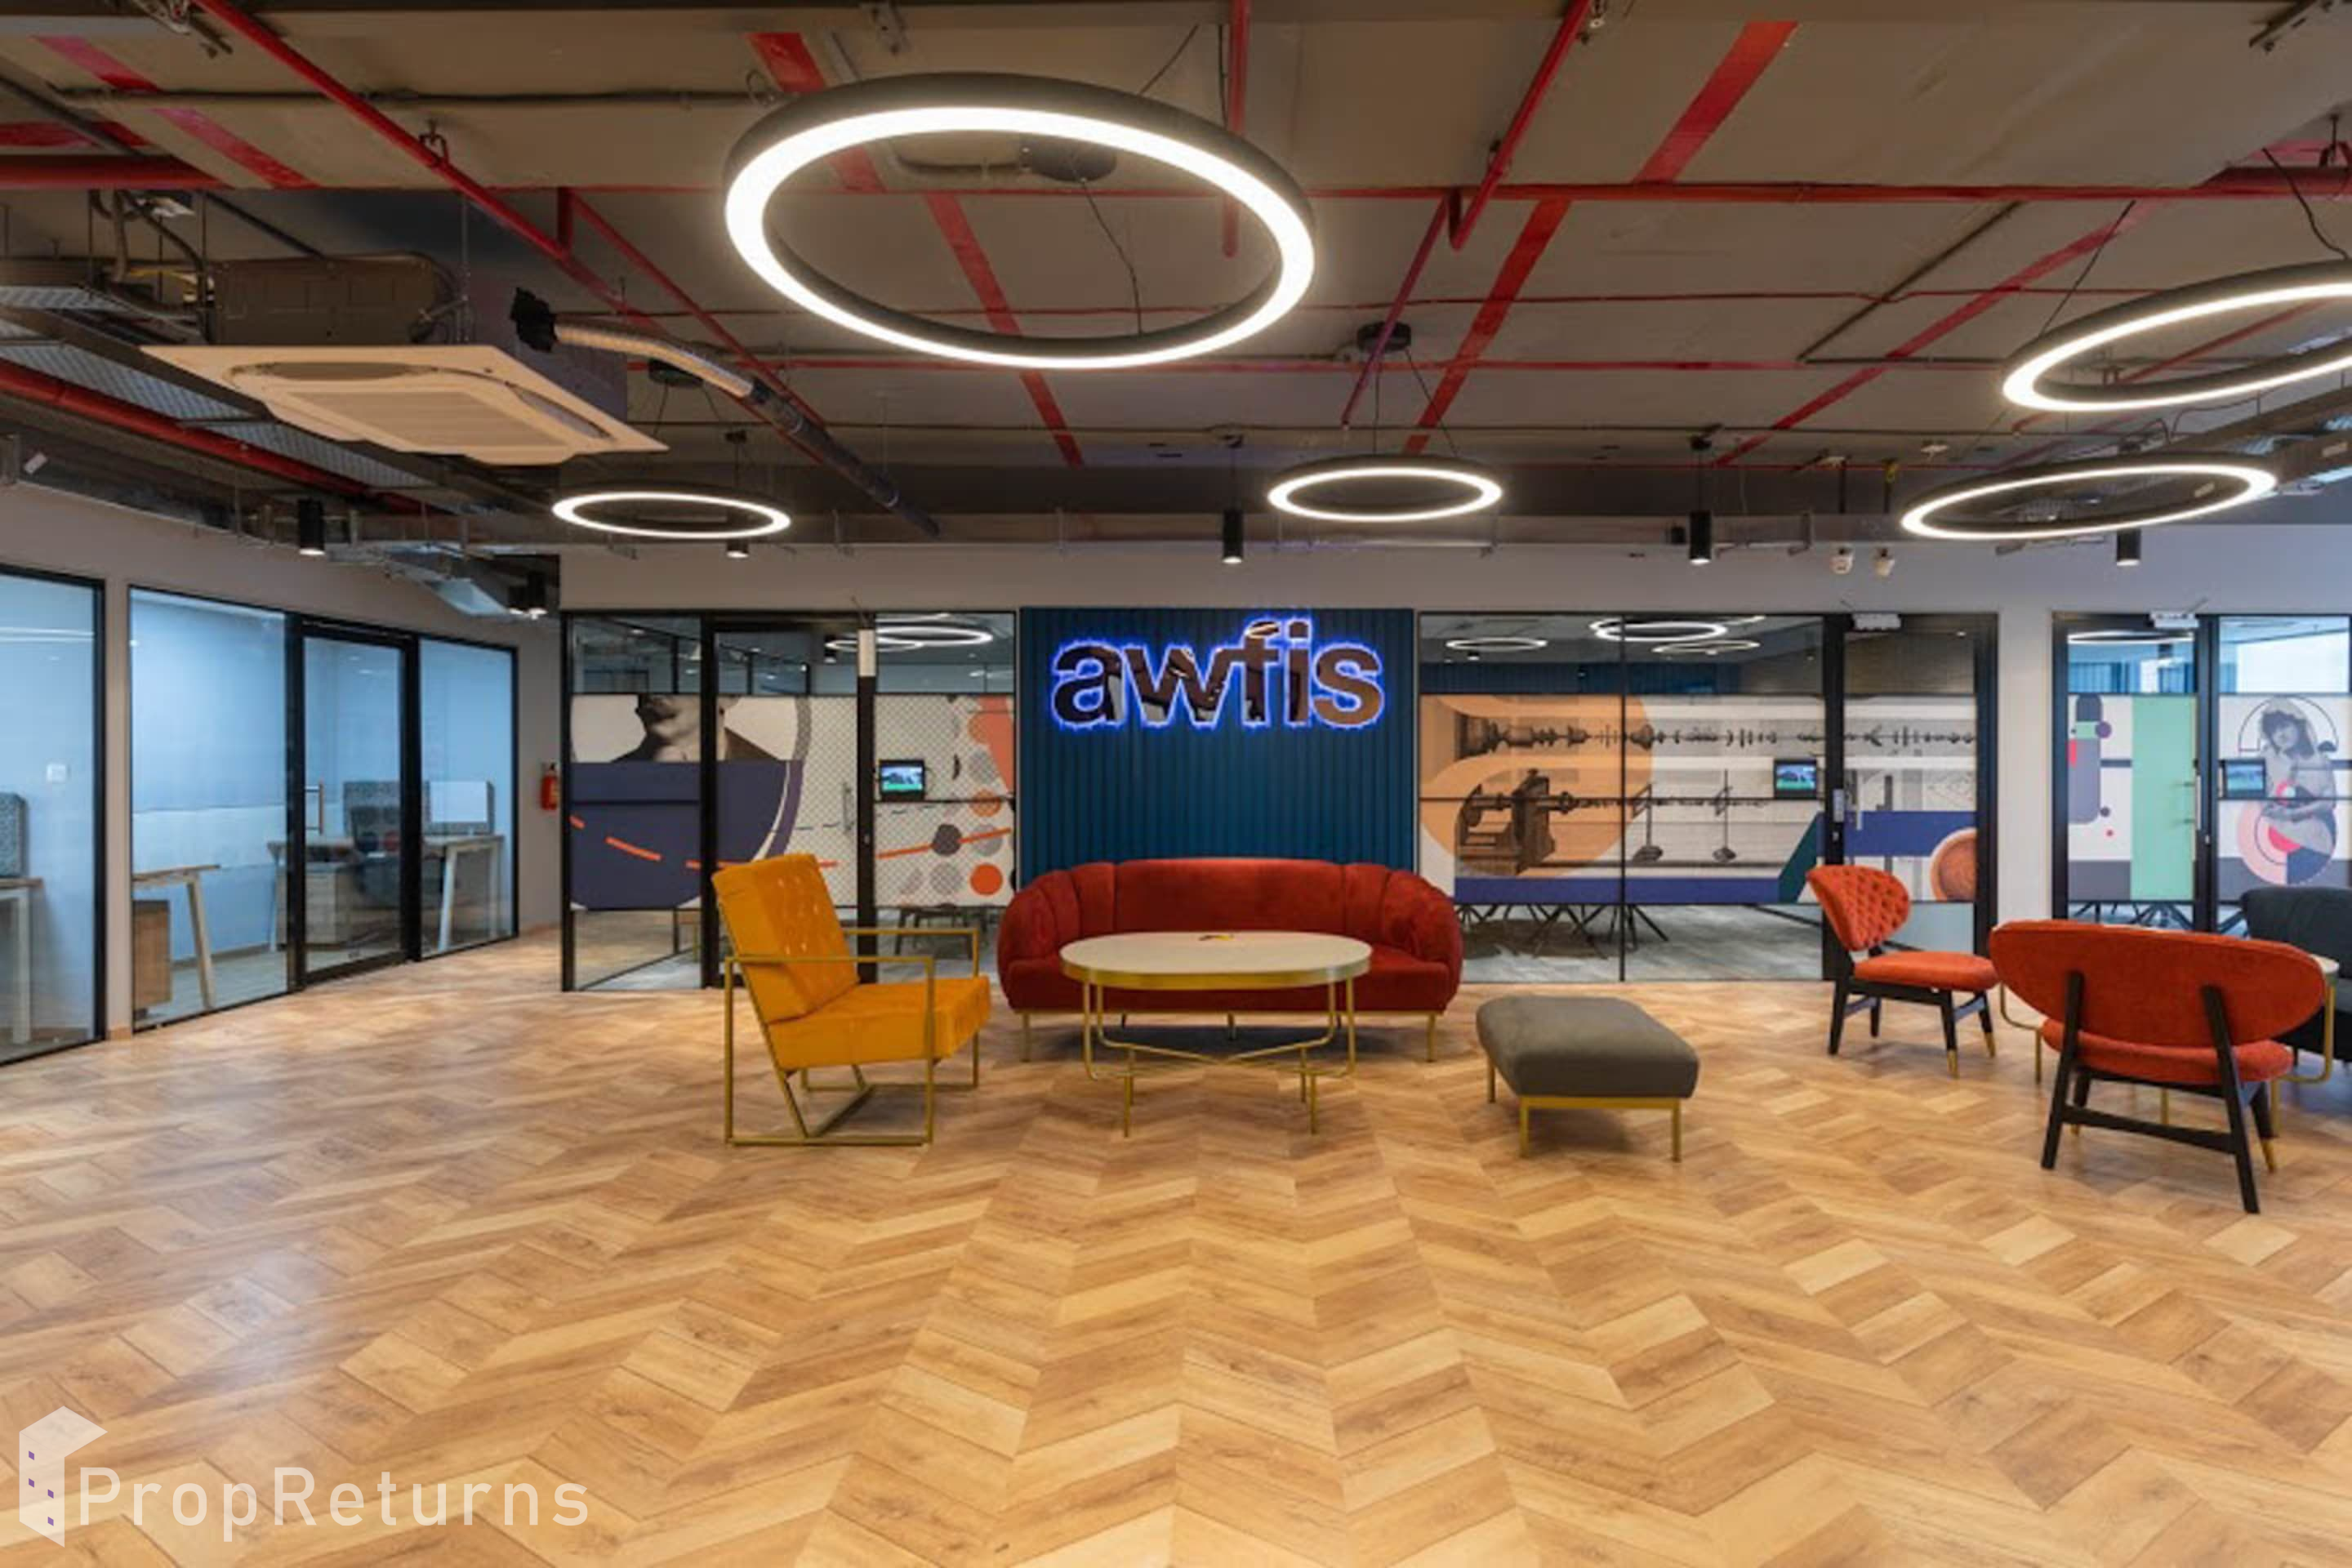 Evolving office design trends in flex spaces - Awfis